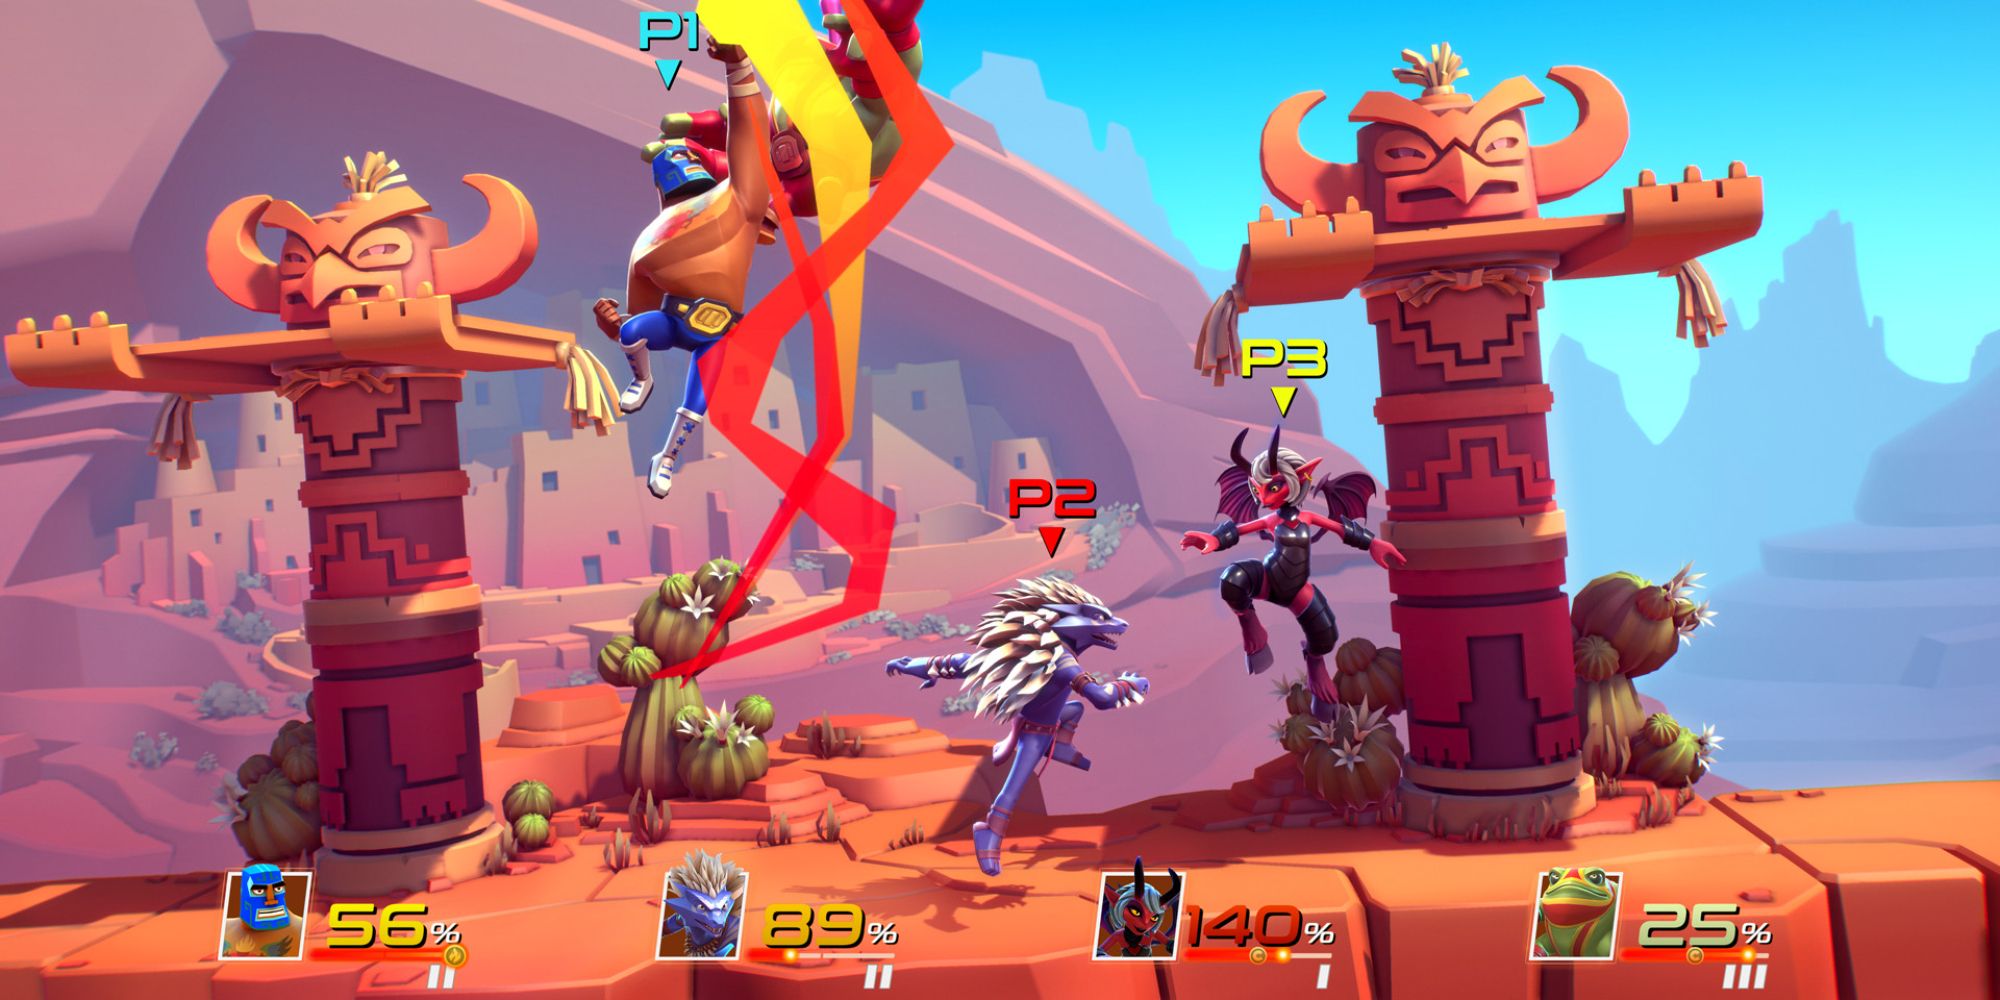 Juan and other Brawlout characters fighting in a desert